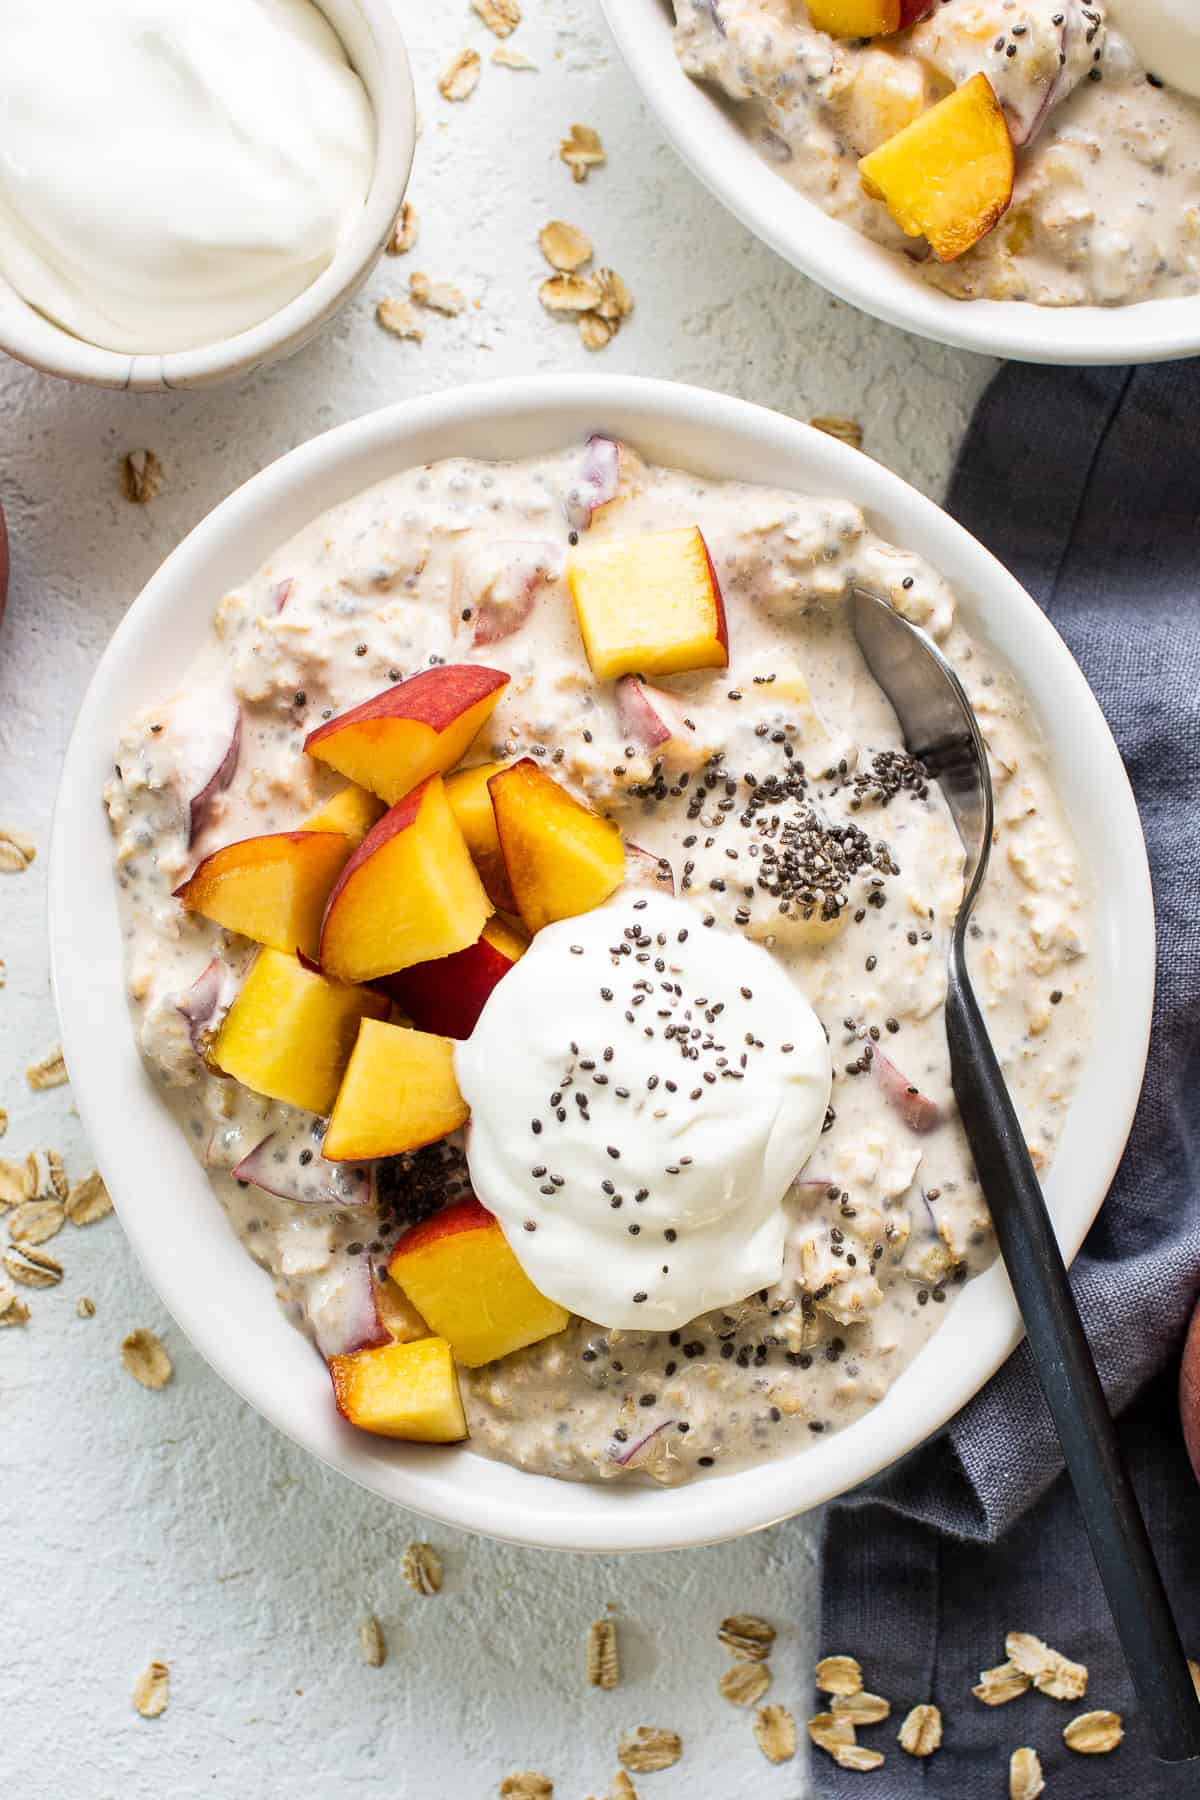 Strawberry Peach Overnight Oats - Project Meal Plan